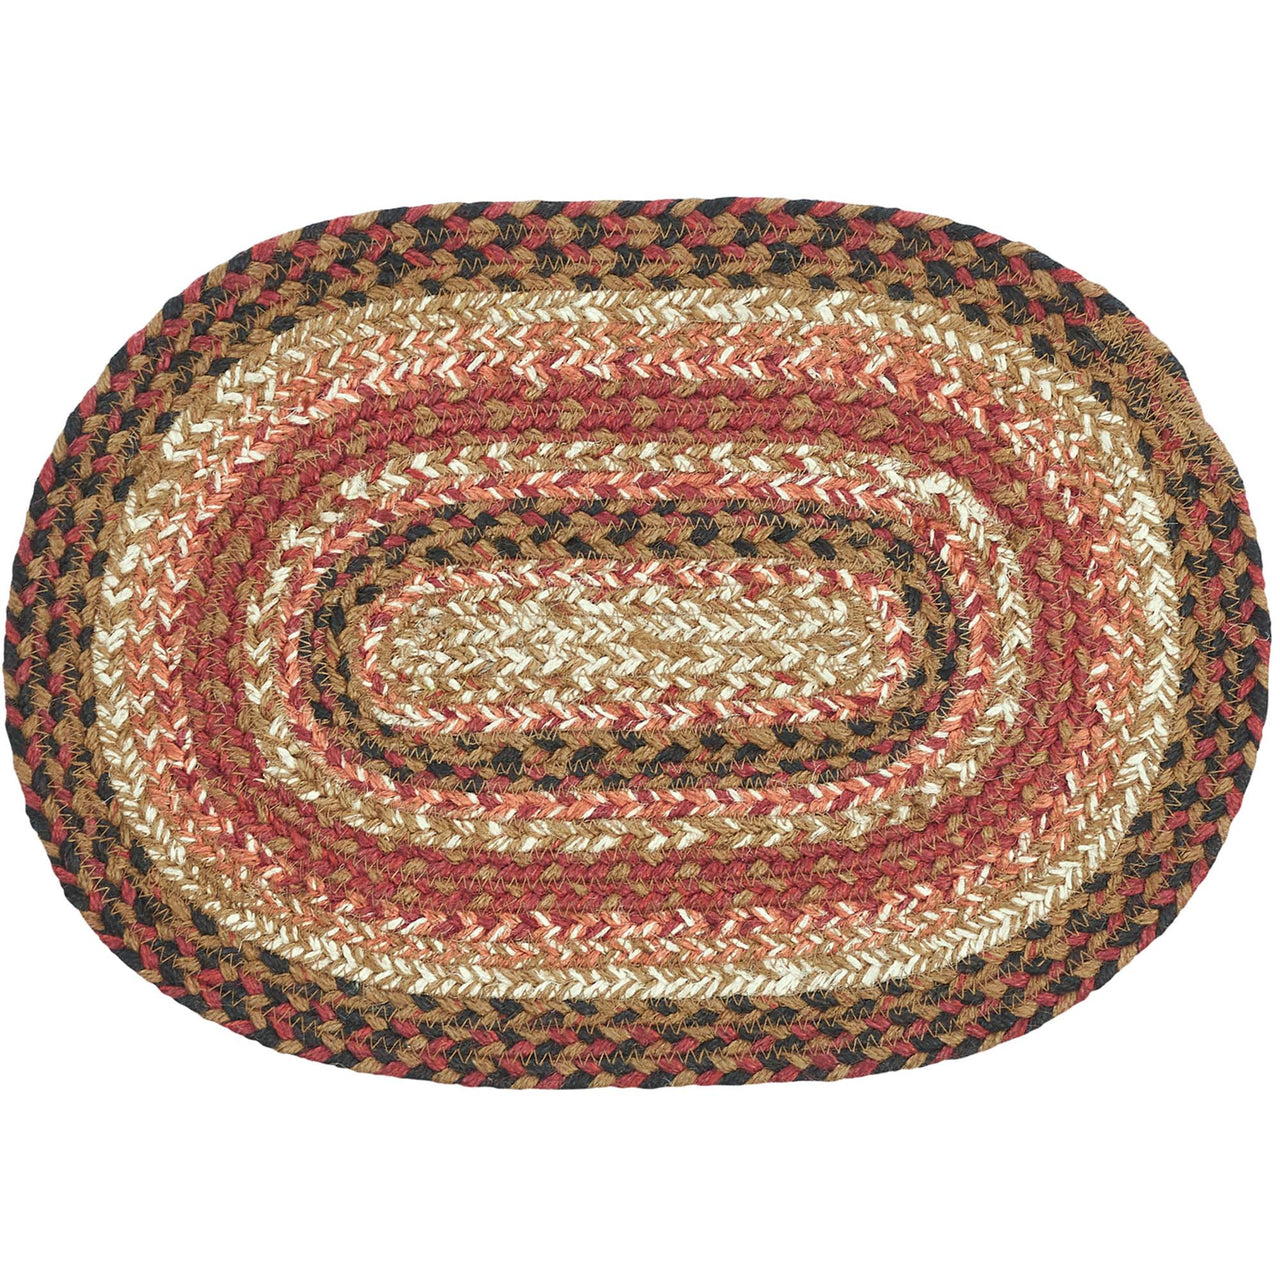 Ginger Spice Jute Braided Oval Placemat 10"x15" VHC Brands